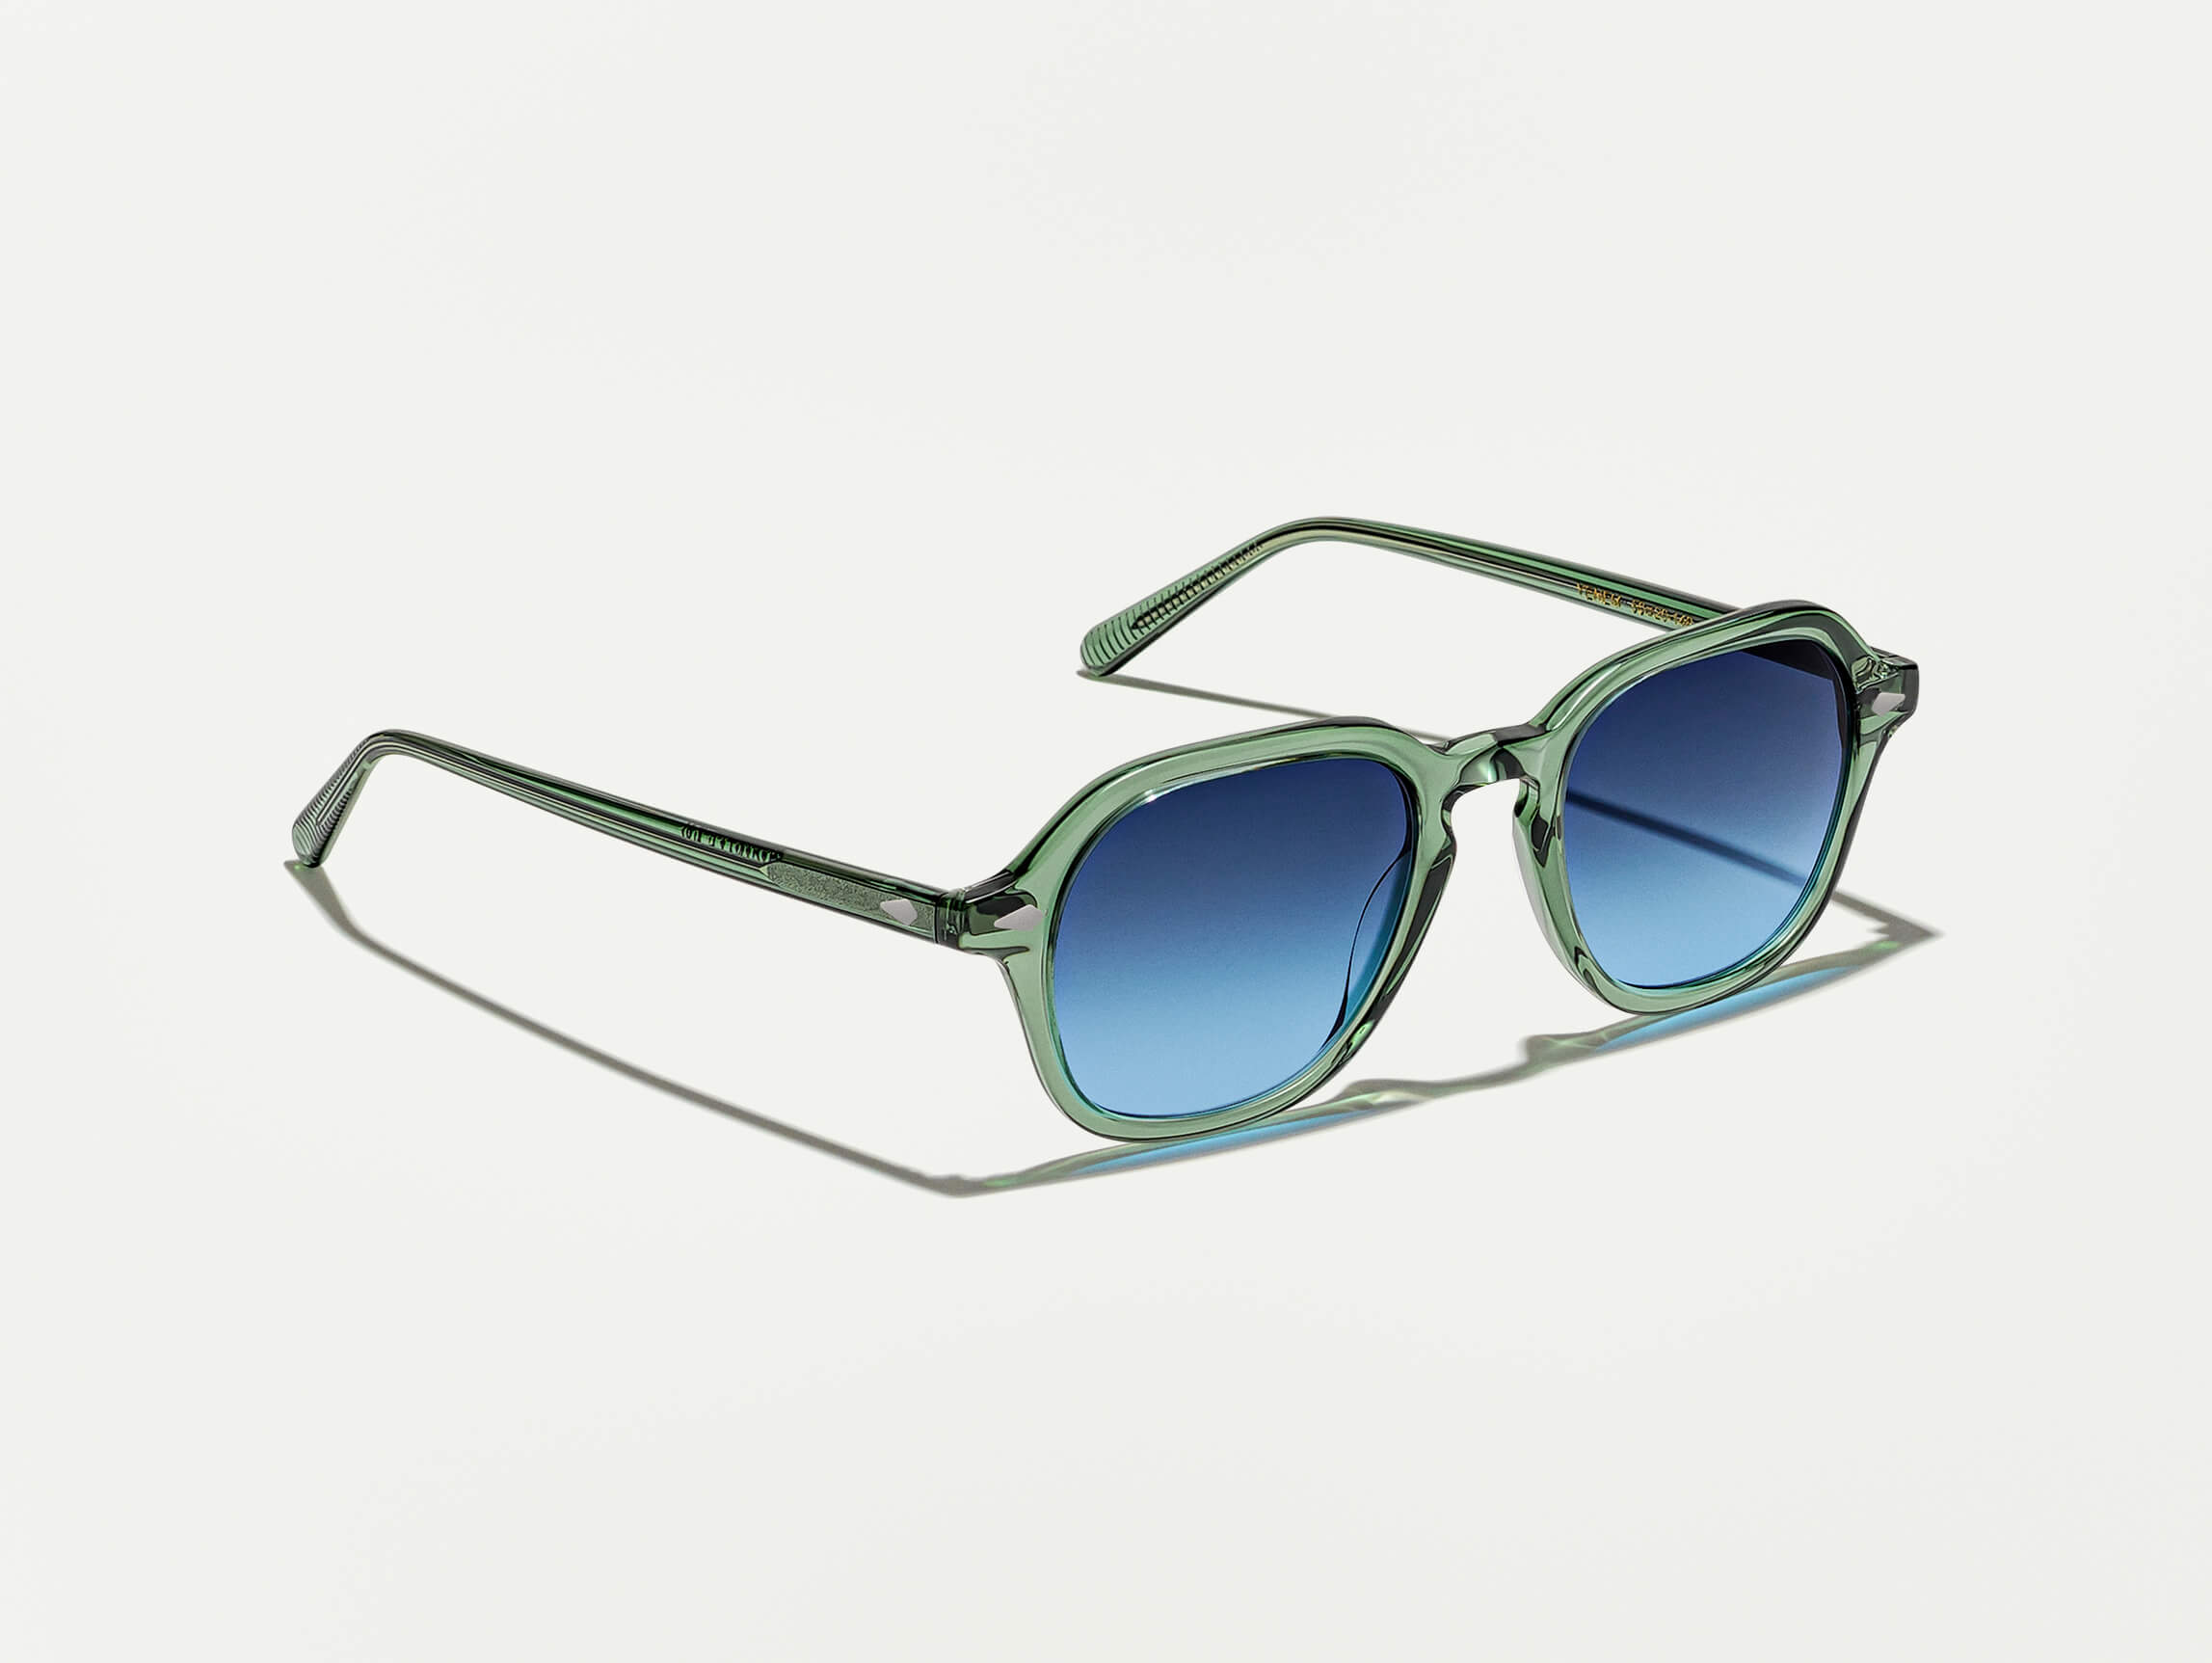 #color_pine | The YENEM SUN in Pine with Denim Blue Tinted Lenses